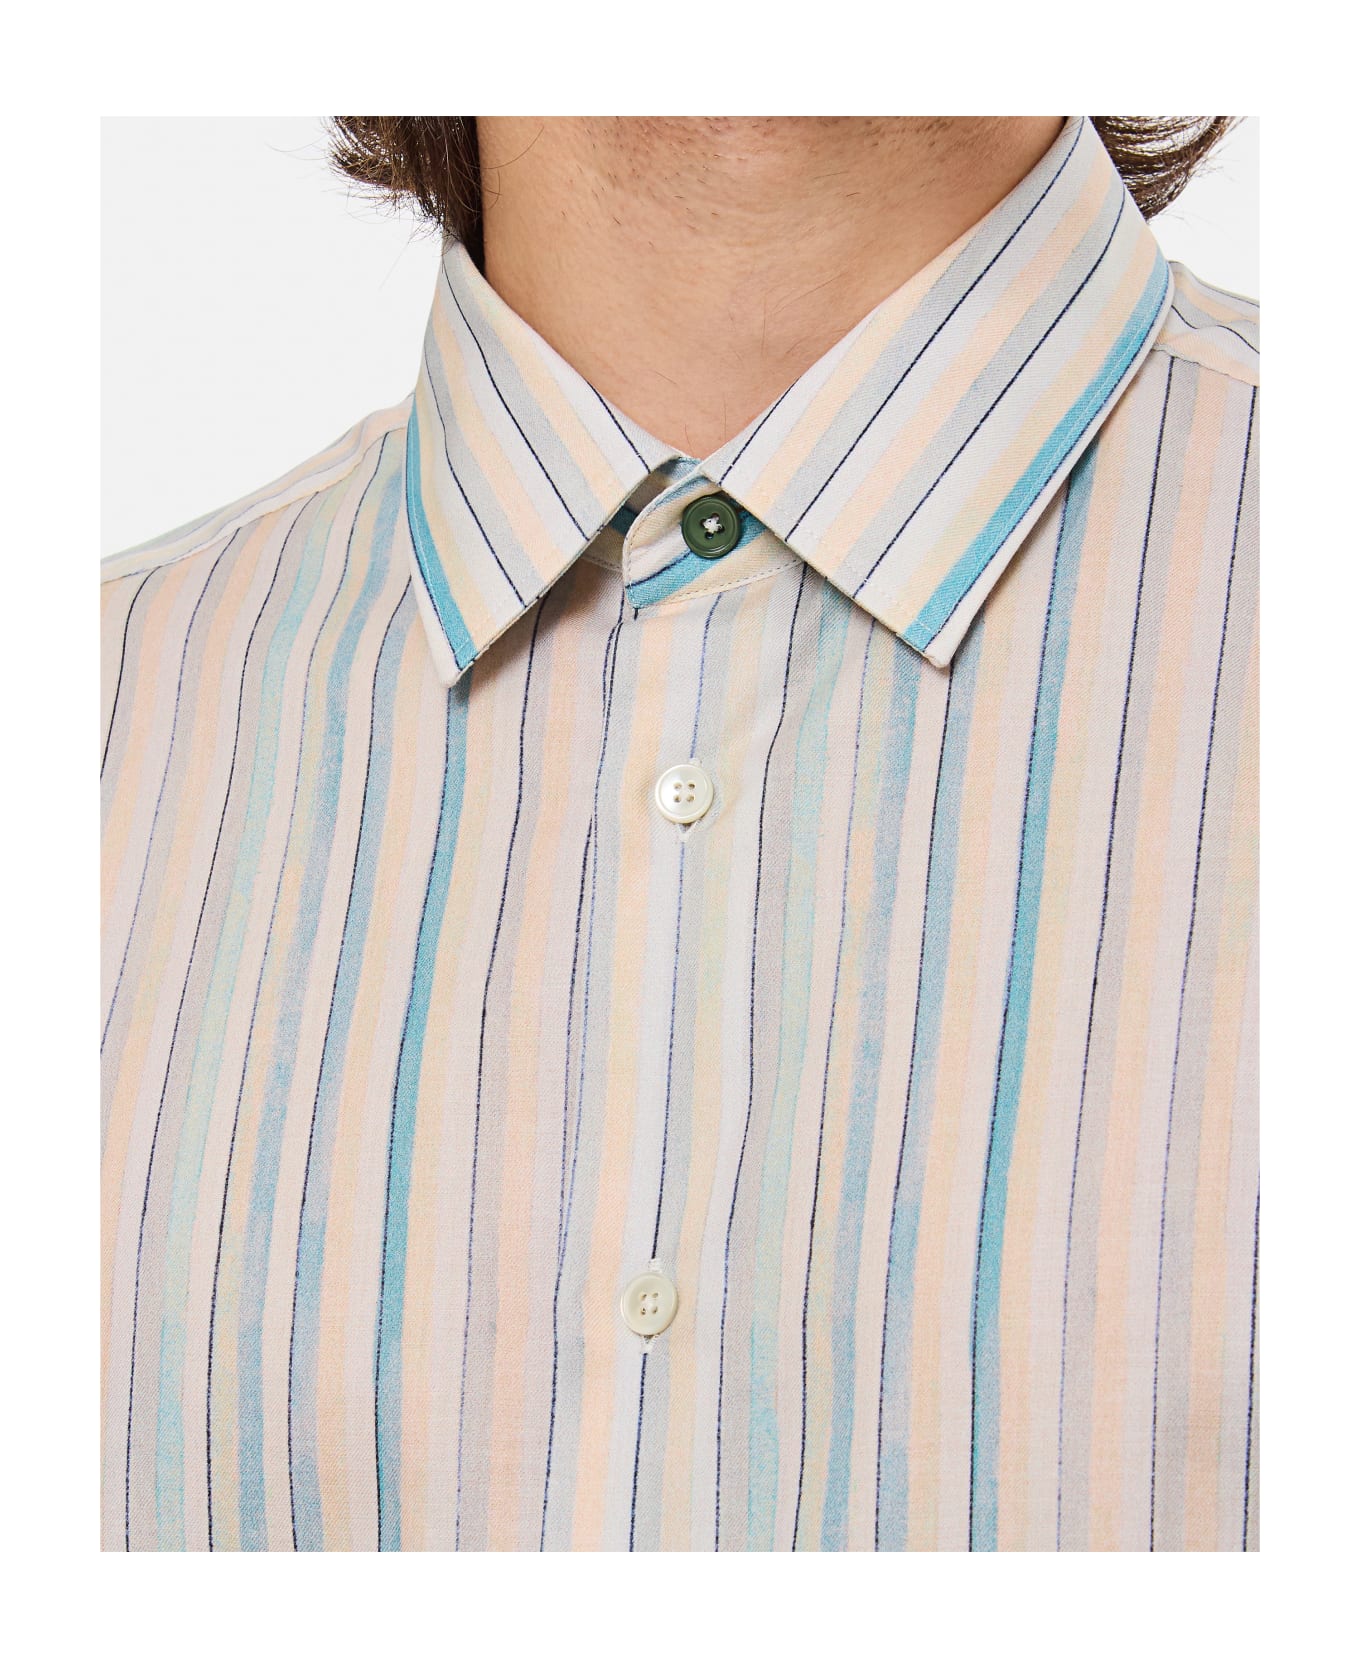 Paul Smith Tailored Fit Shirt - MultiColour シャツ